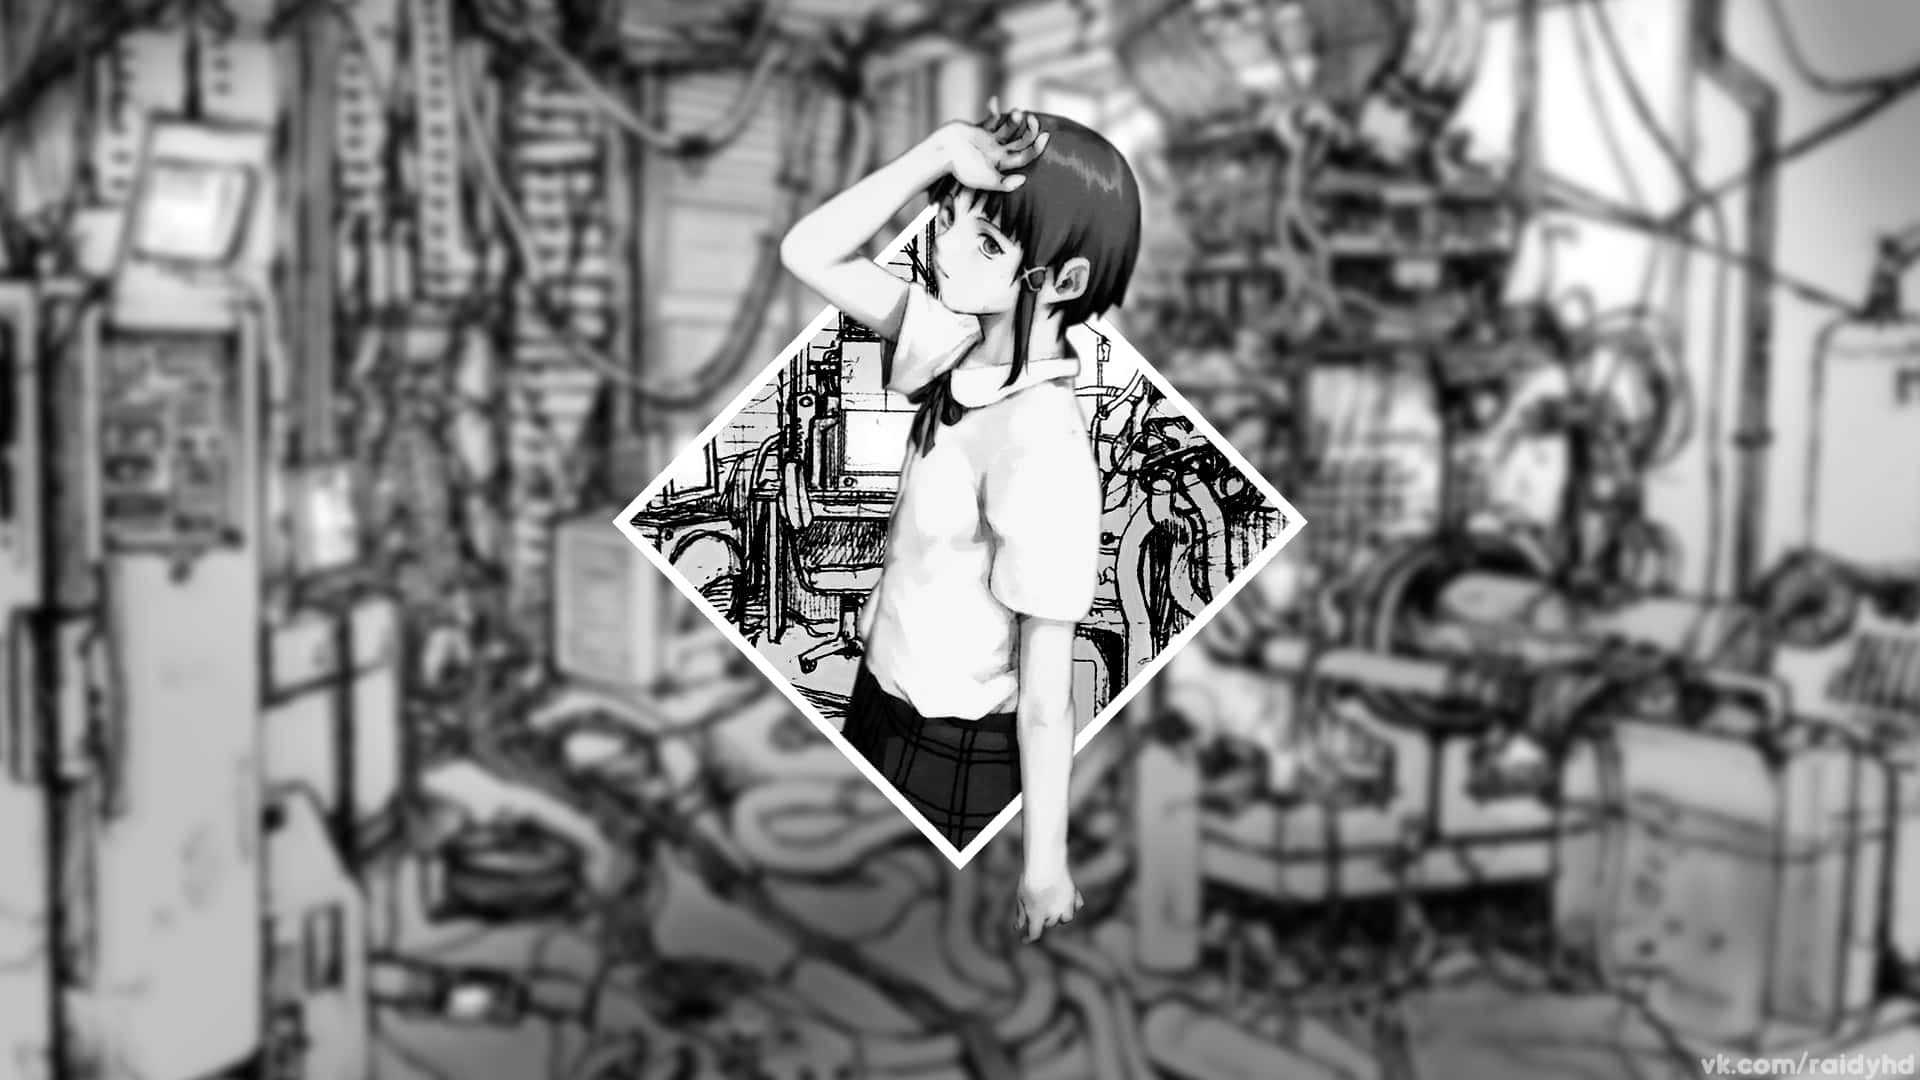 Serial Experiments Lain is a classic cyberpunk anime Wallpaper